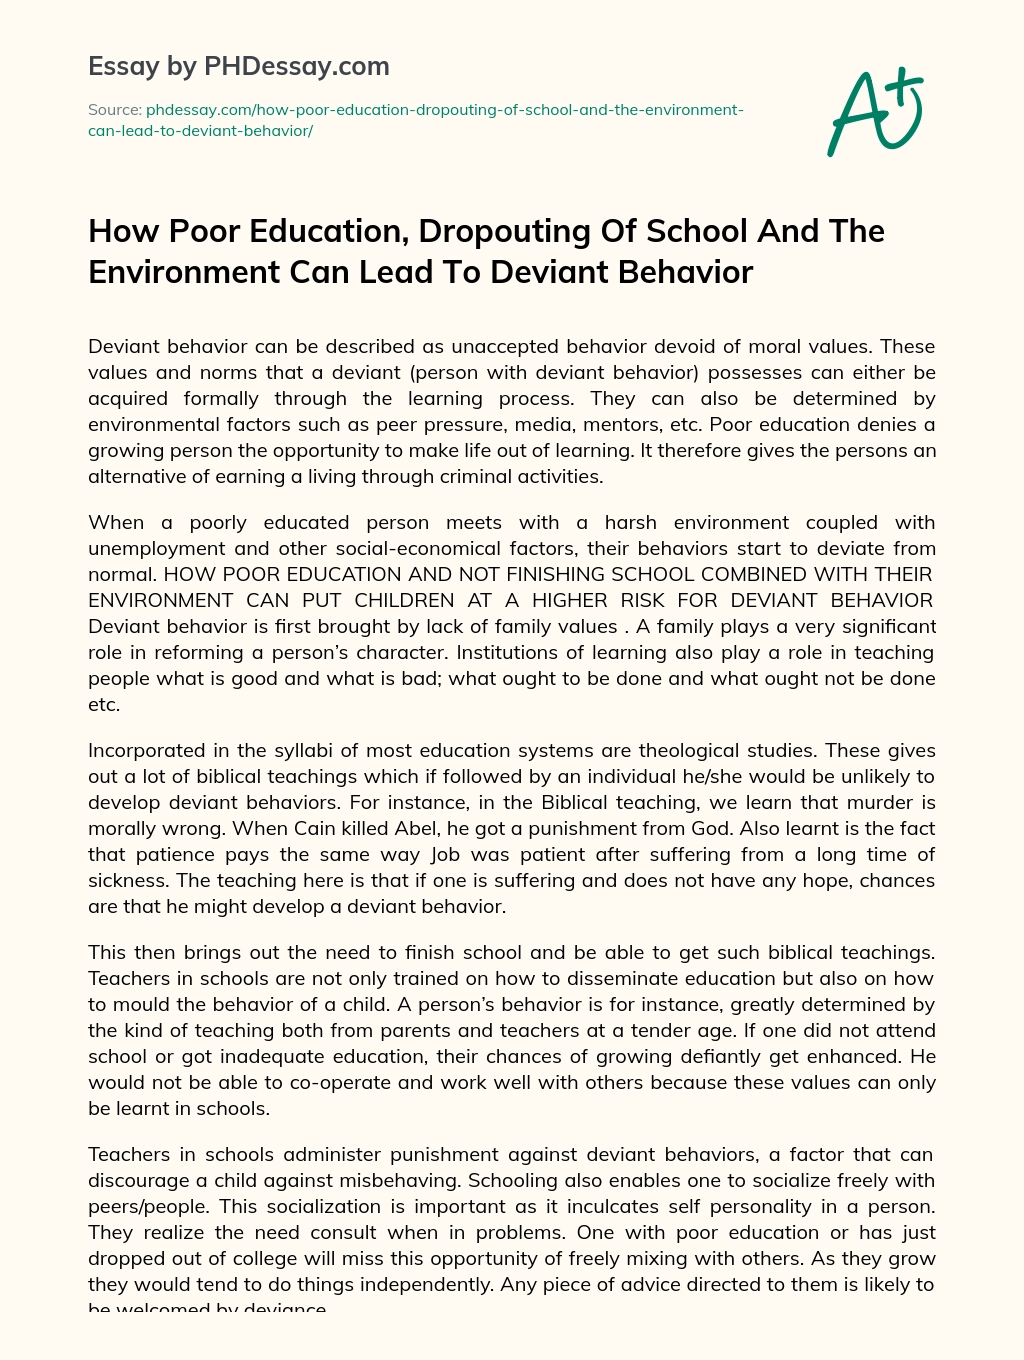 How Poor Education, Dropouting Of School And The Environment Can Lead To Deviant Behavior essay